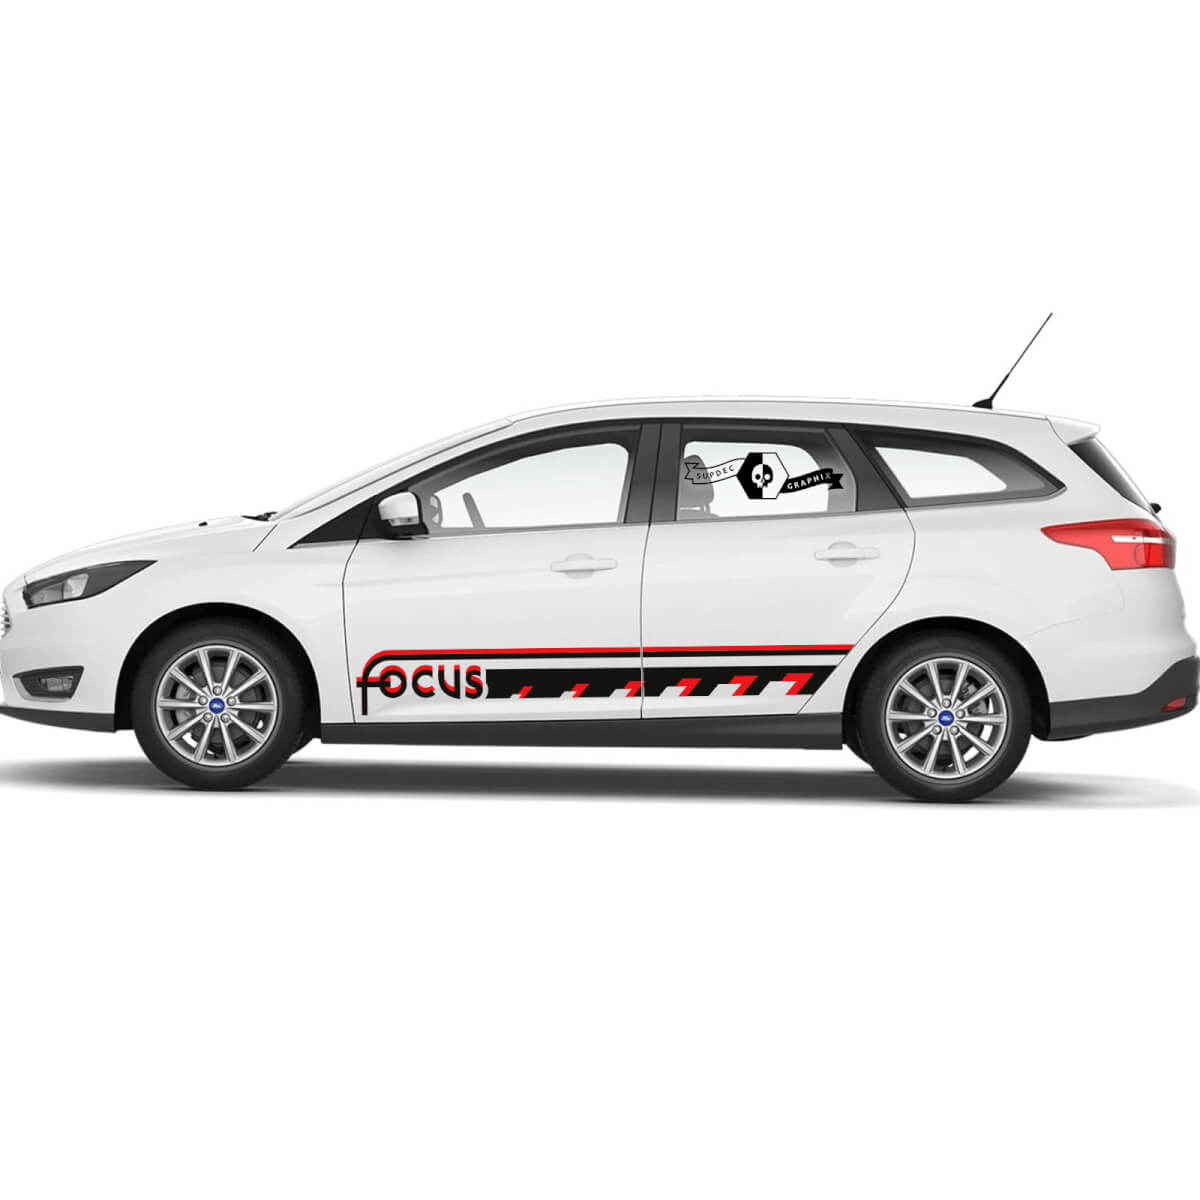 Side Doors Two Colors Rocker Panel vinyl decals stickers for Ford Focus